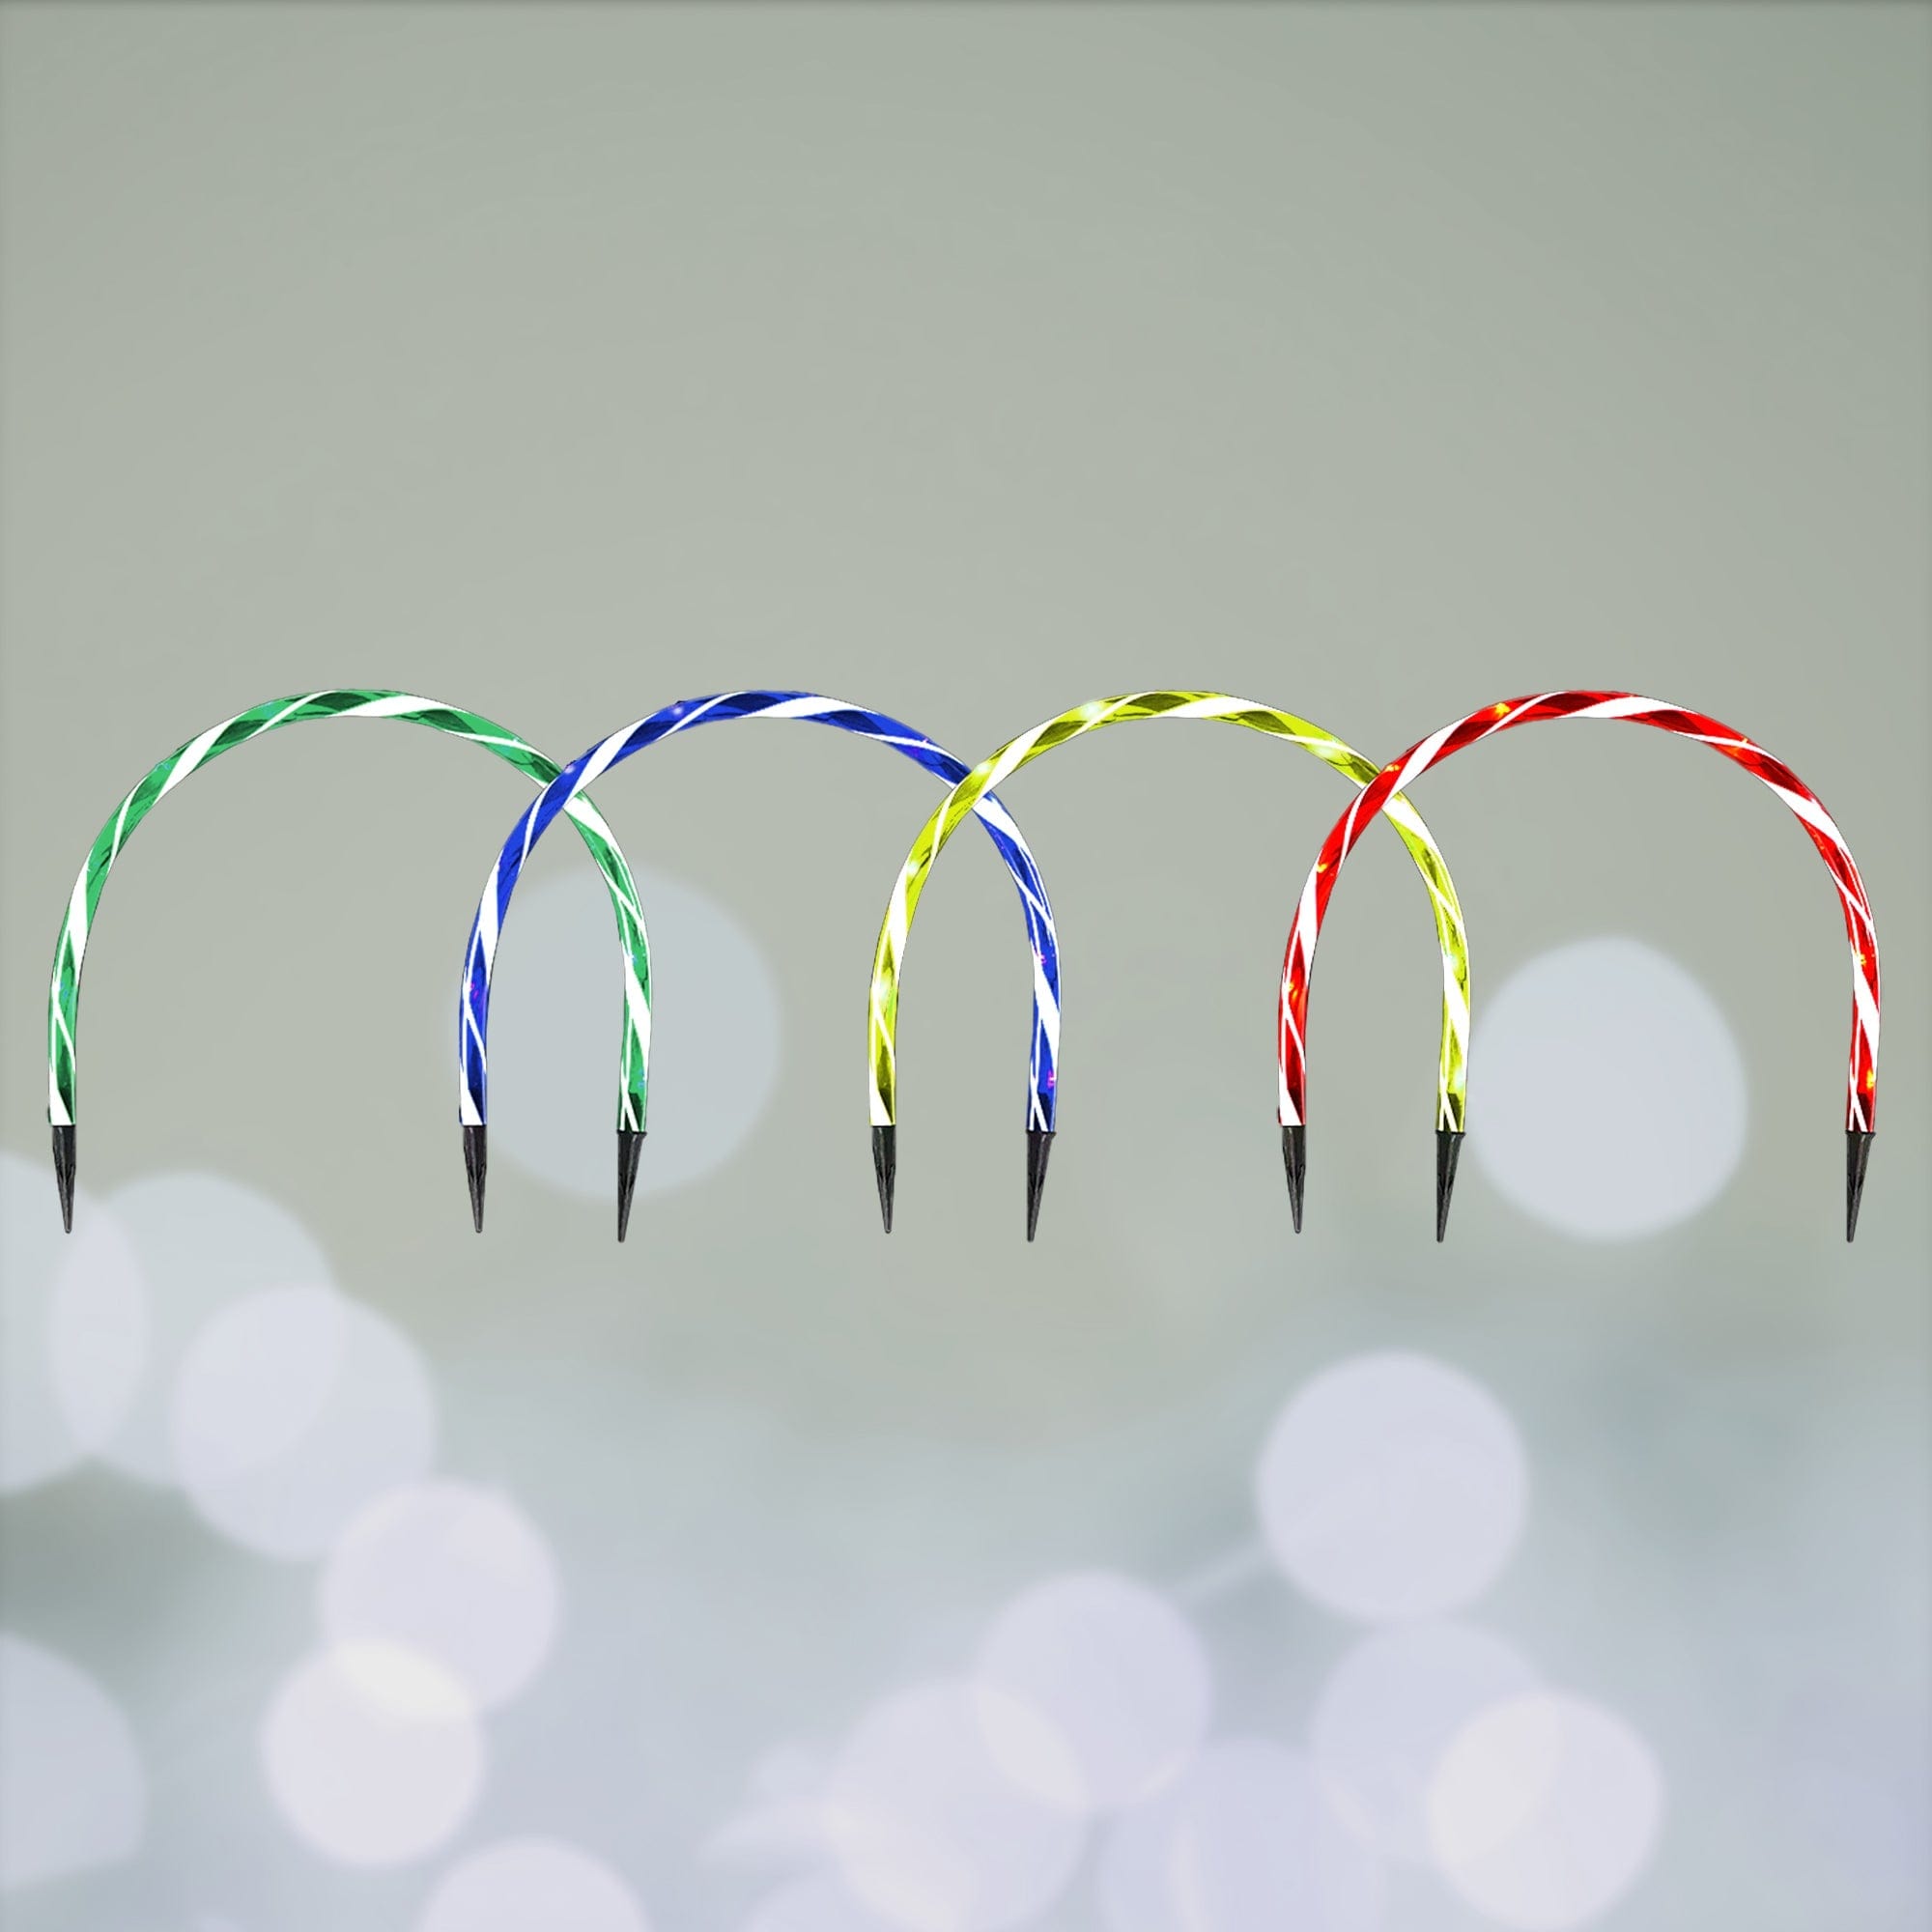 Lexi Lighting Christmas Path Light Multicolour Set of 4 Arch Pathway Candy Cane Lights - 2 Colour Options LLPTH07-P